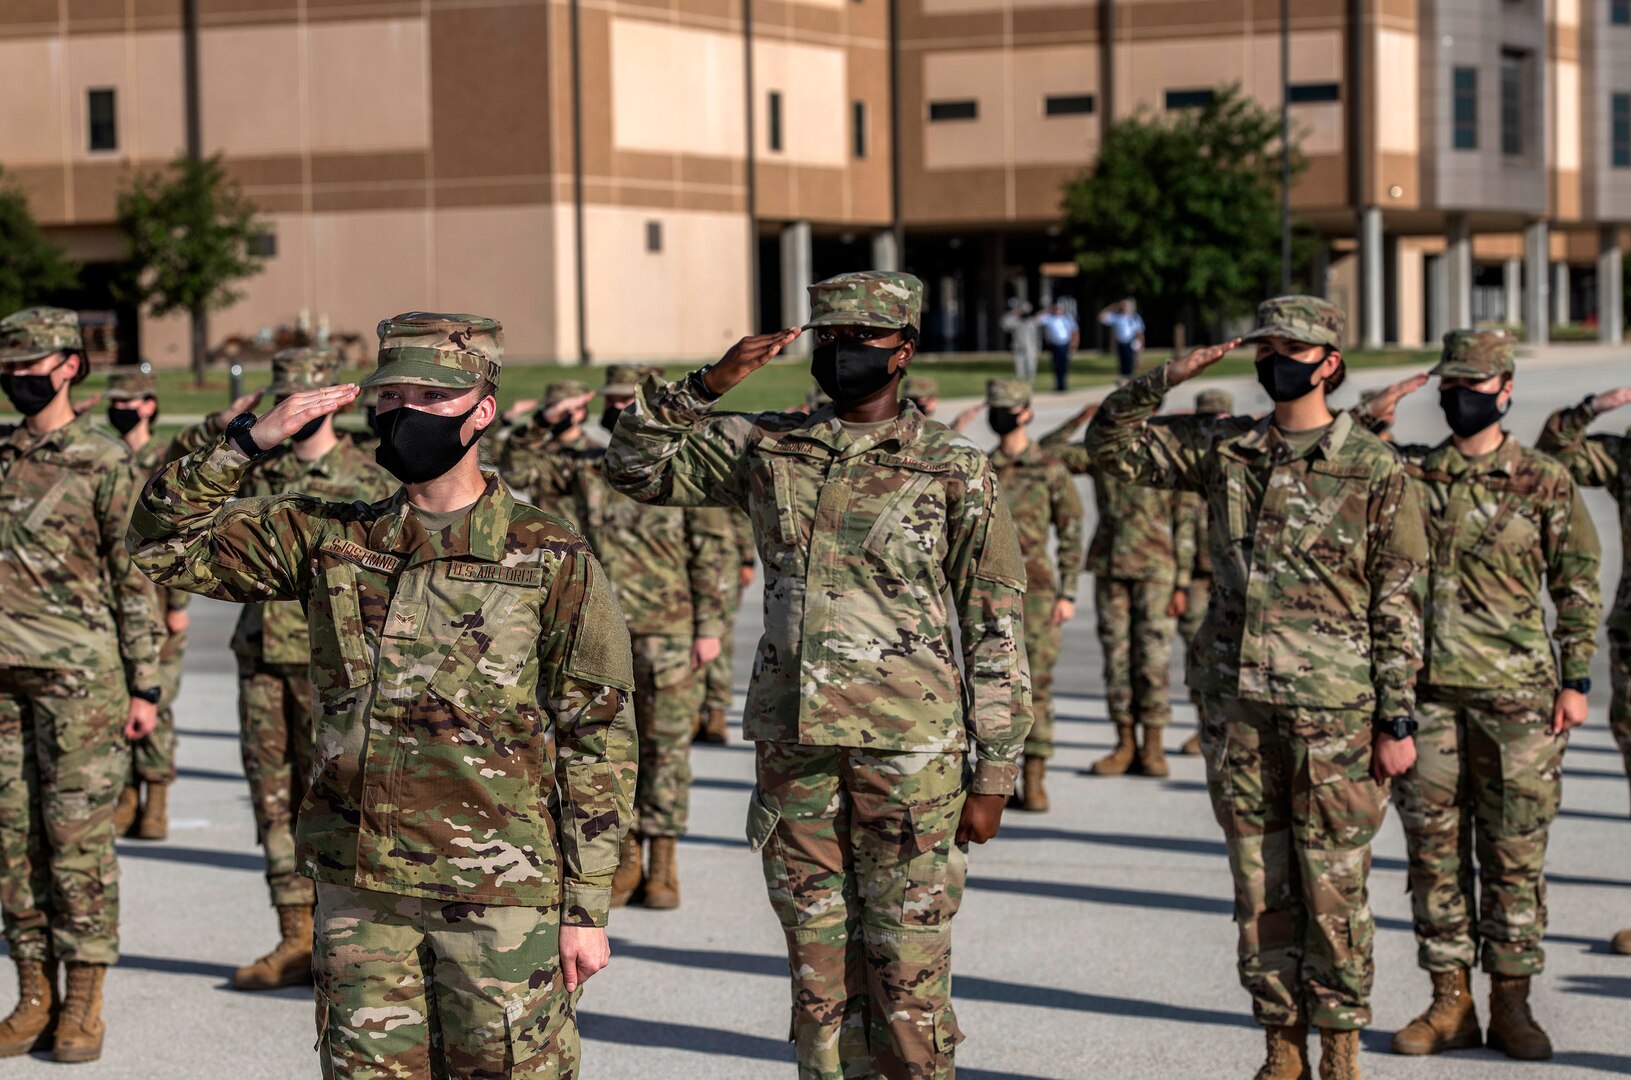 U.S. Air Force basic military graduation and coining ceremony is held Aug. 13, 2020, for the 320th Training Squadron at the Pfingston Reception Center on Joint Base San Antonio-Lackland.